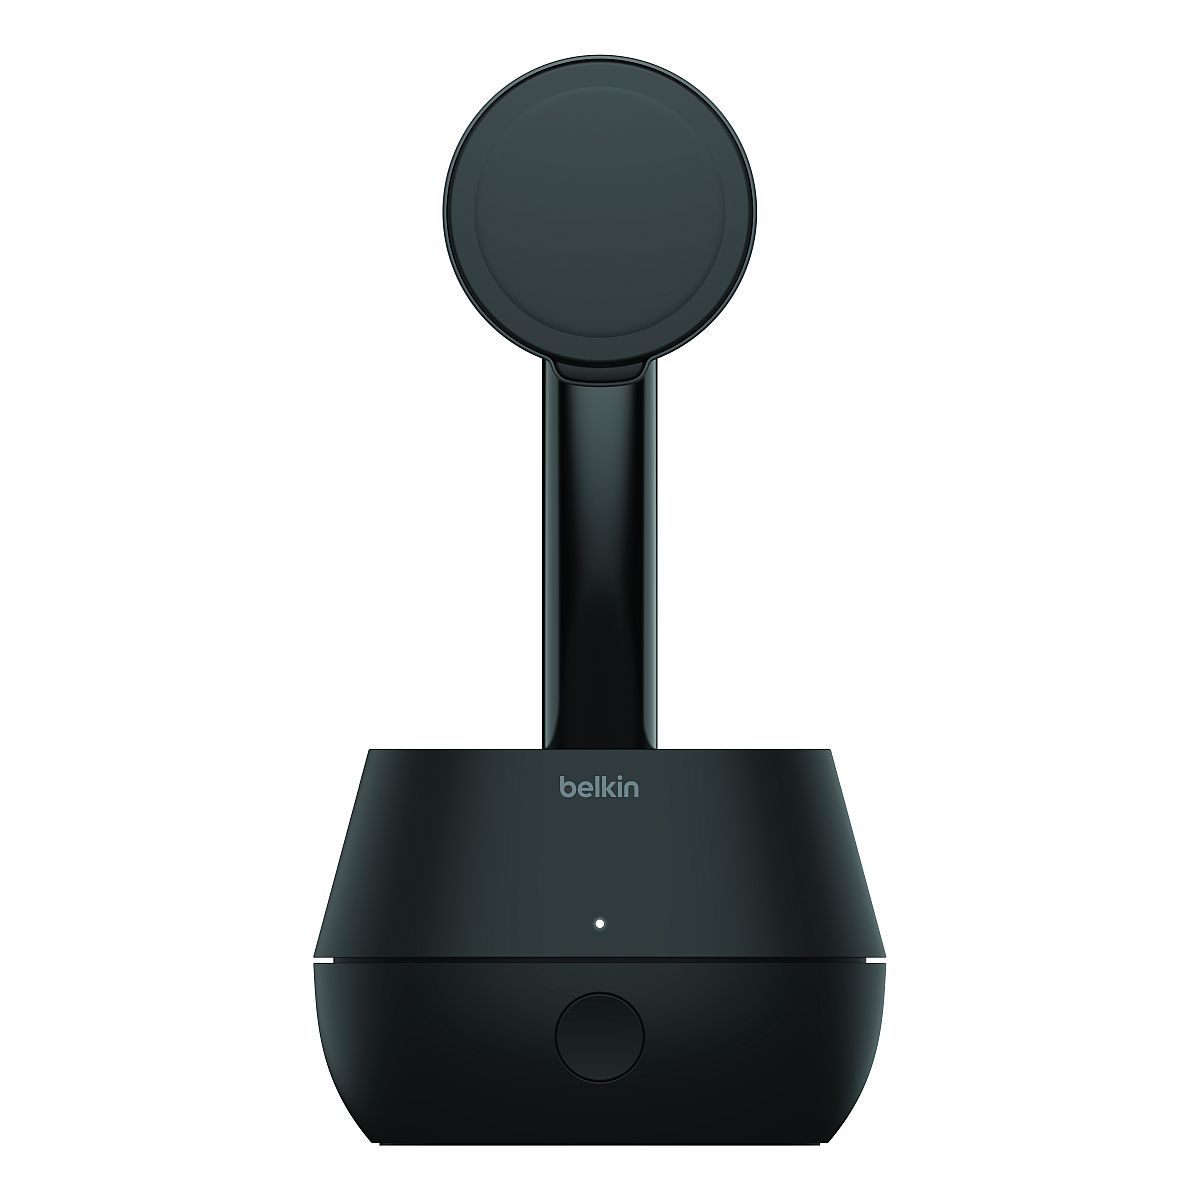 belkin Stand Pro product 1